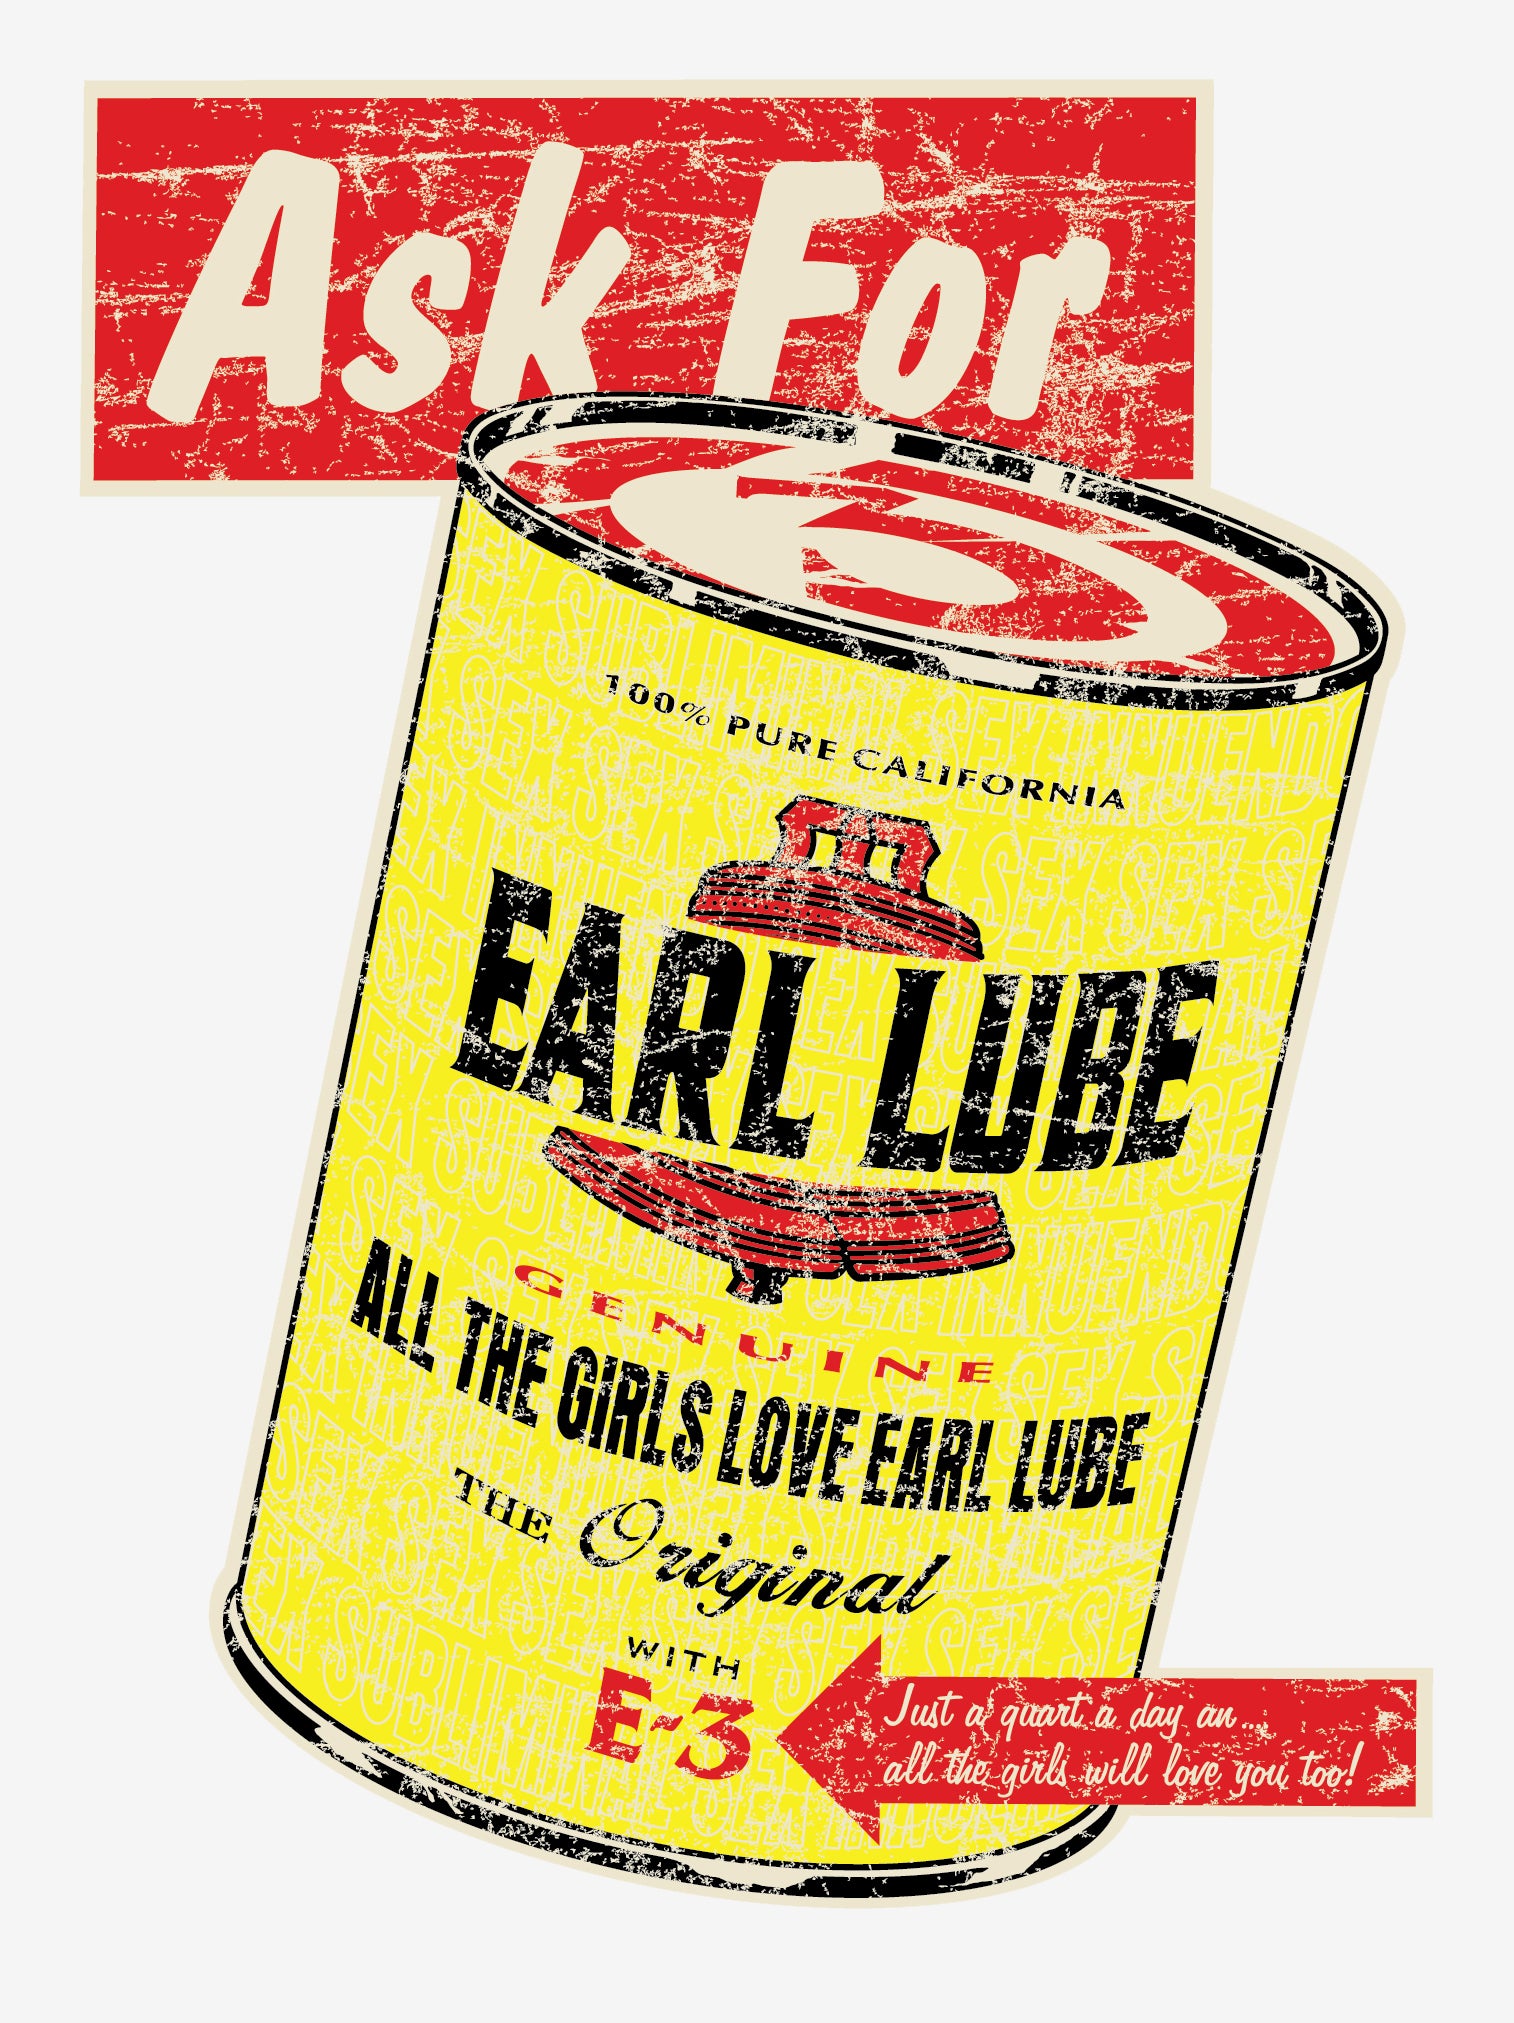 Earl Lube Can Sticker: The original "Earl Lube" can, faux advertising campaign image, run on the streets of Los Angeles / Hollywood, which accidentaly evolved into a tangible brand.